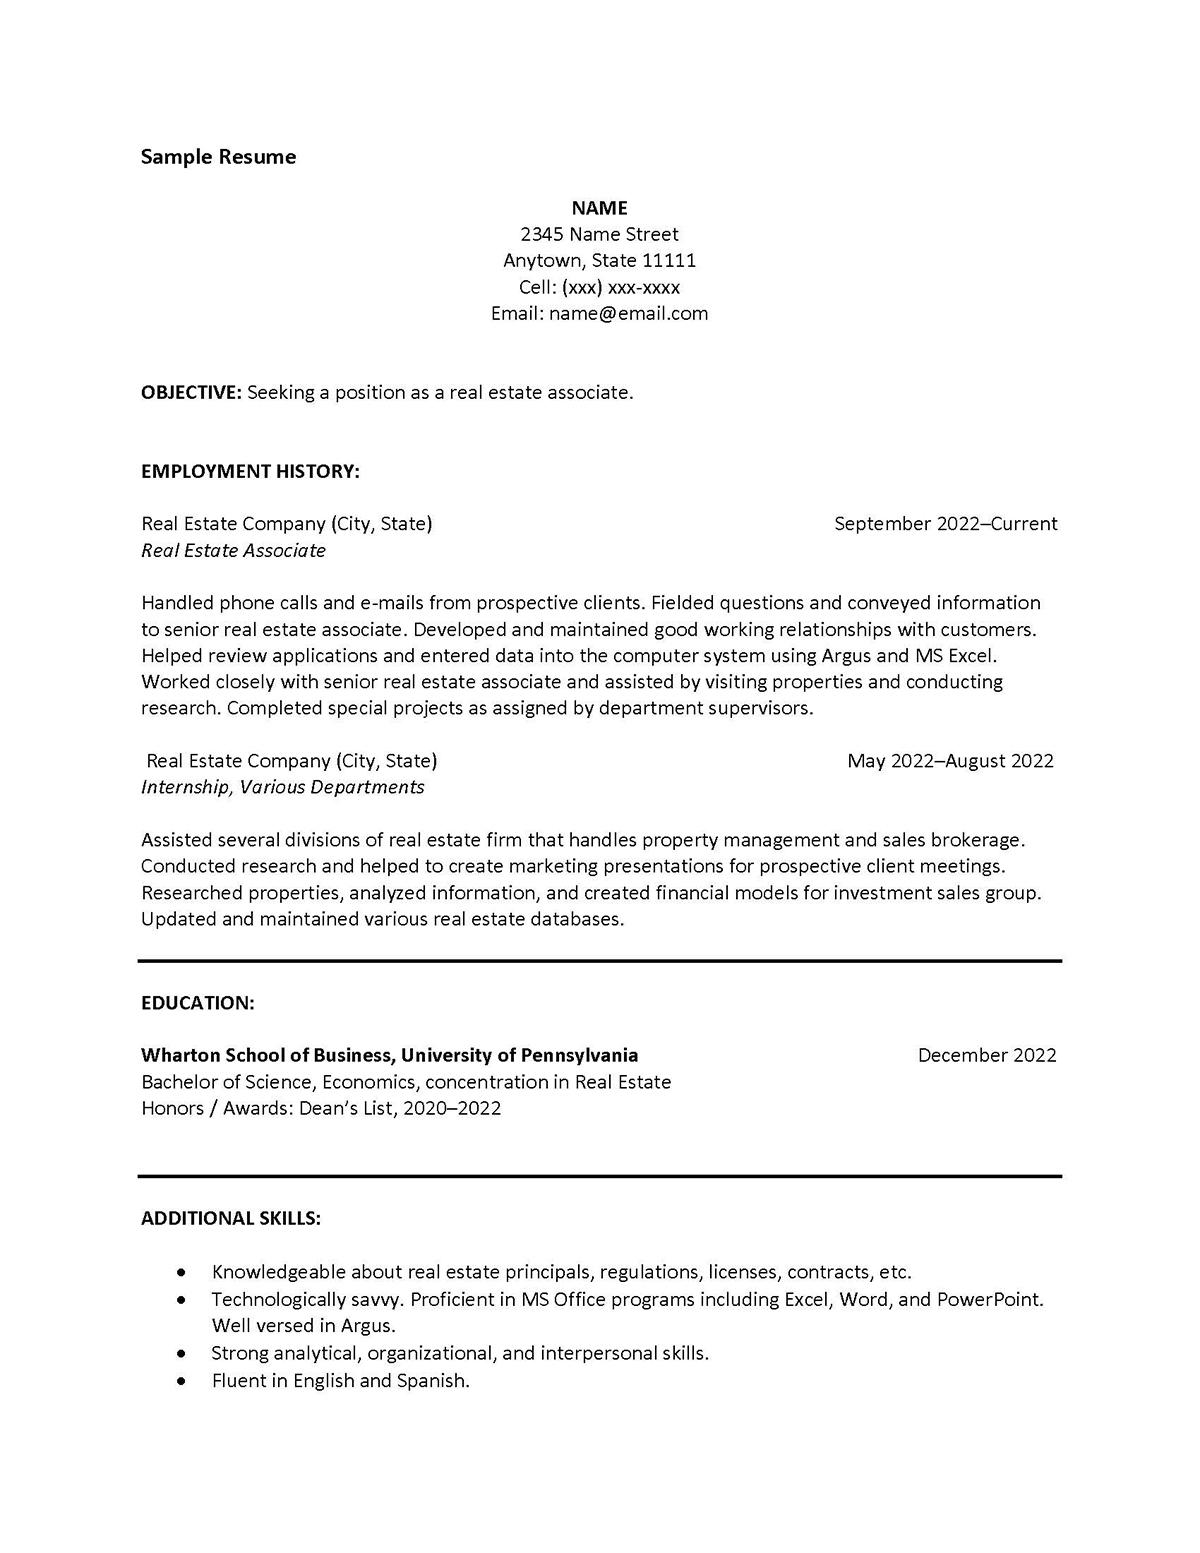 Sample resume: Real Estate, Low Experience, Chronological